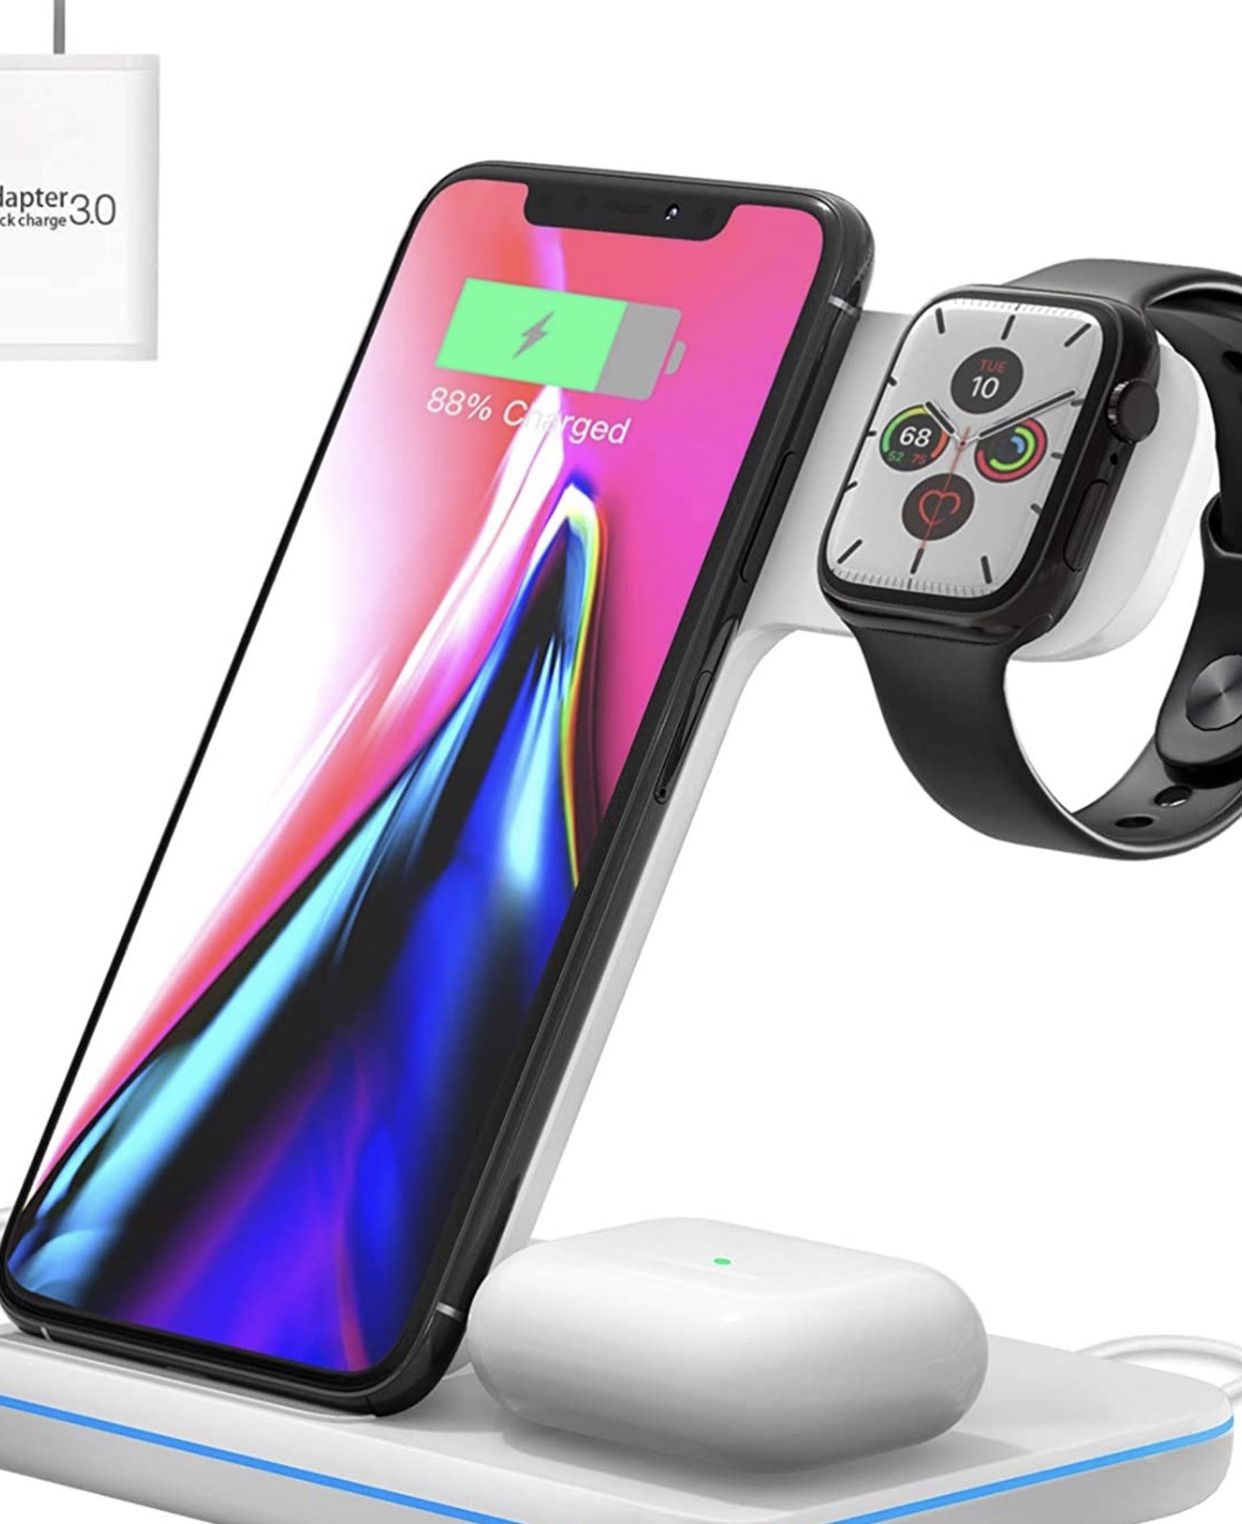 Wireless Charging Station, 3 in 1 Qi Charger for Apple Watch 1/2/3/4/5/SE/6 Airpods 2/pro Wireless Charger for iPhone 12/11/11 Pro/11 Pro Max/XS Max/X